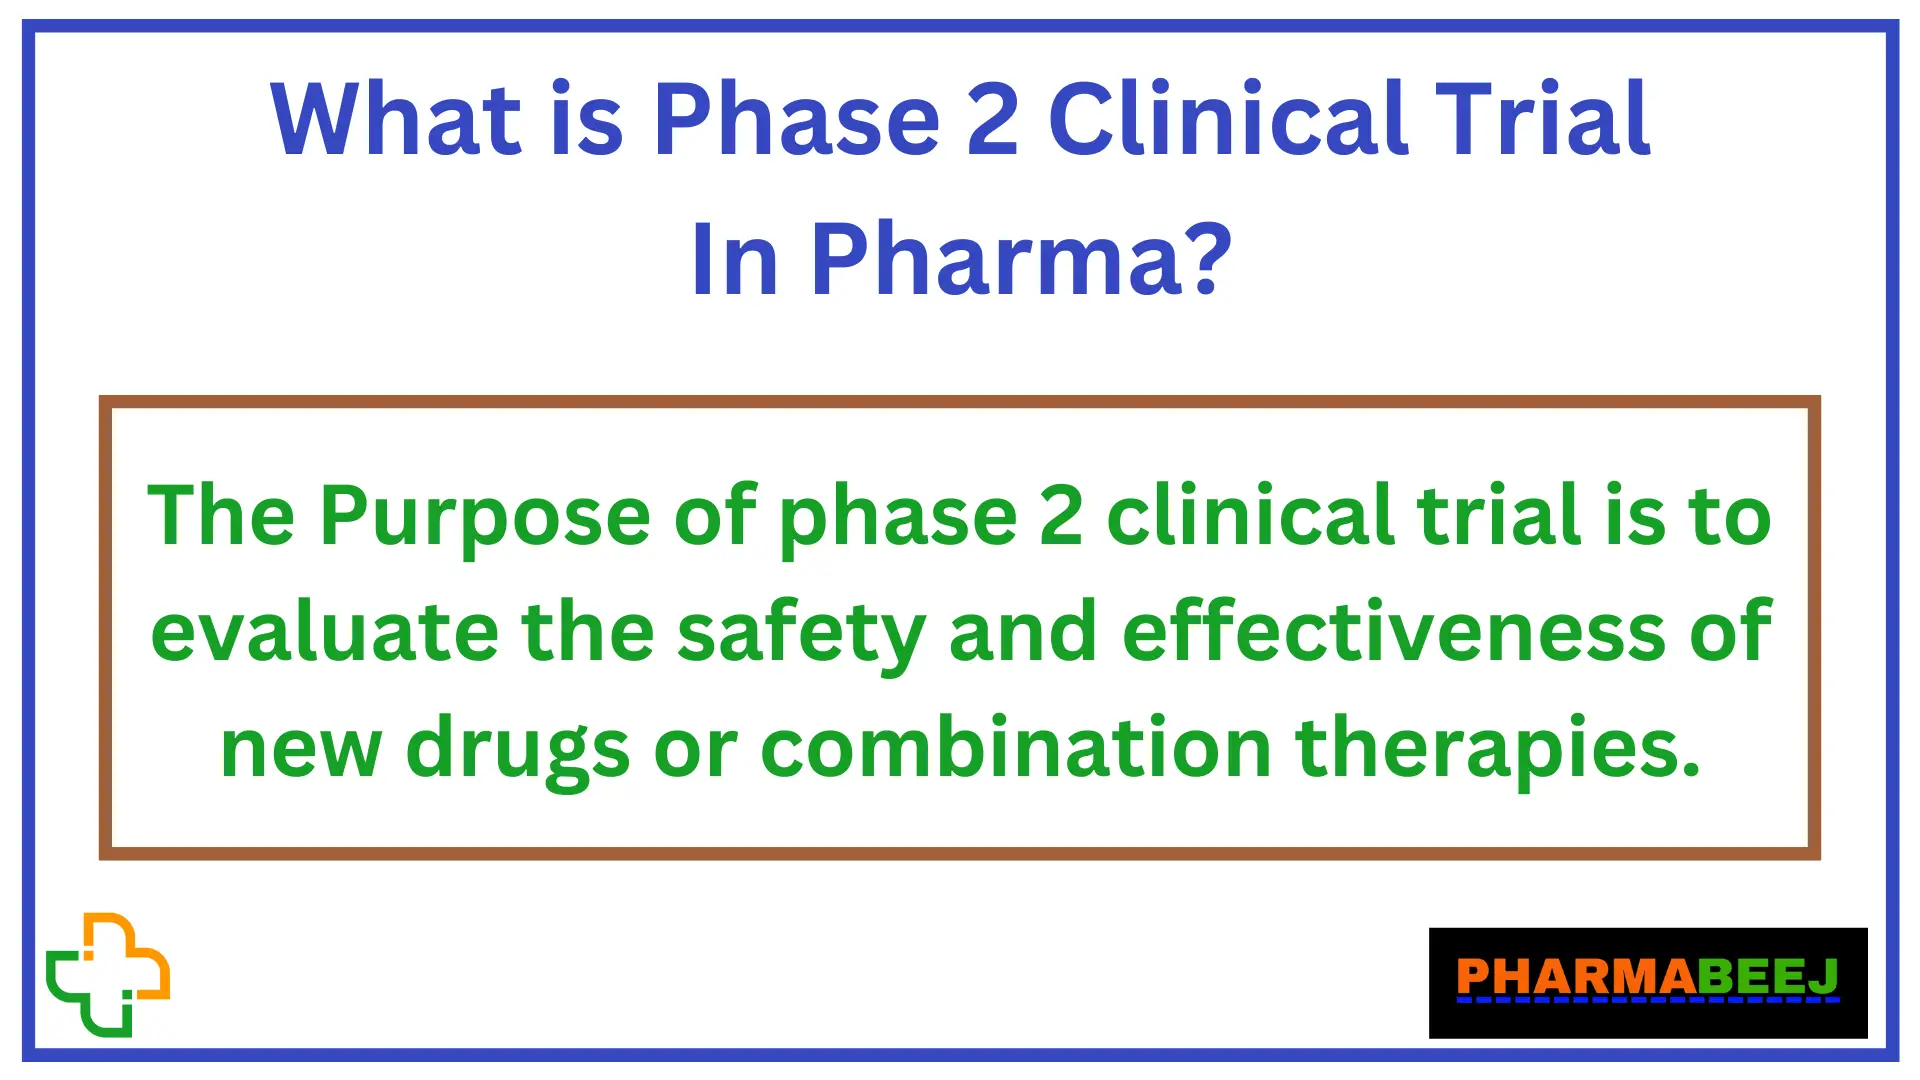 Phase 2 Clinical Trial